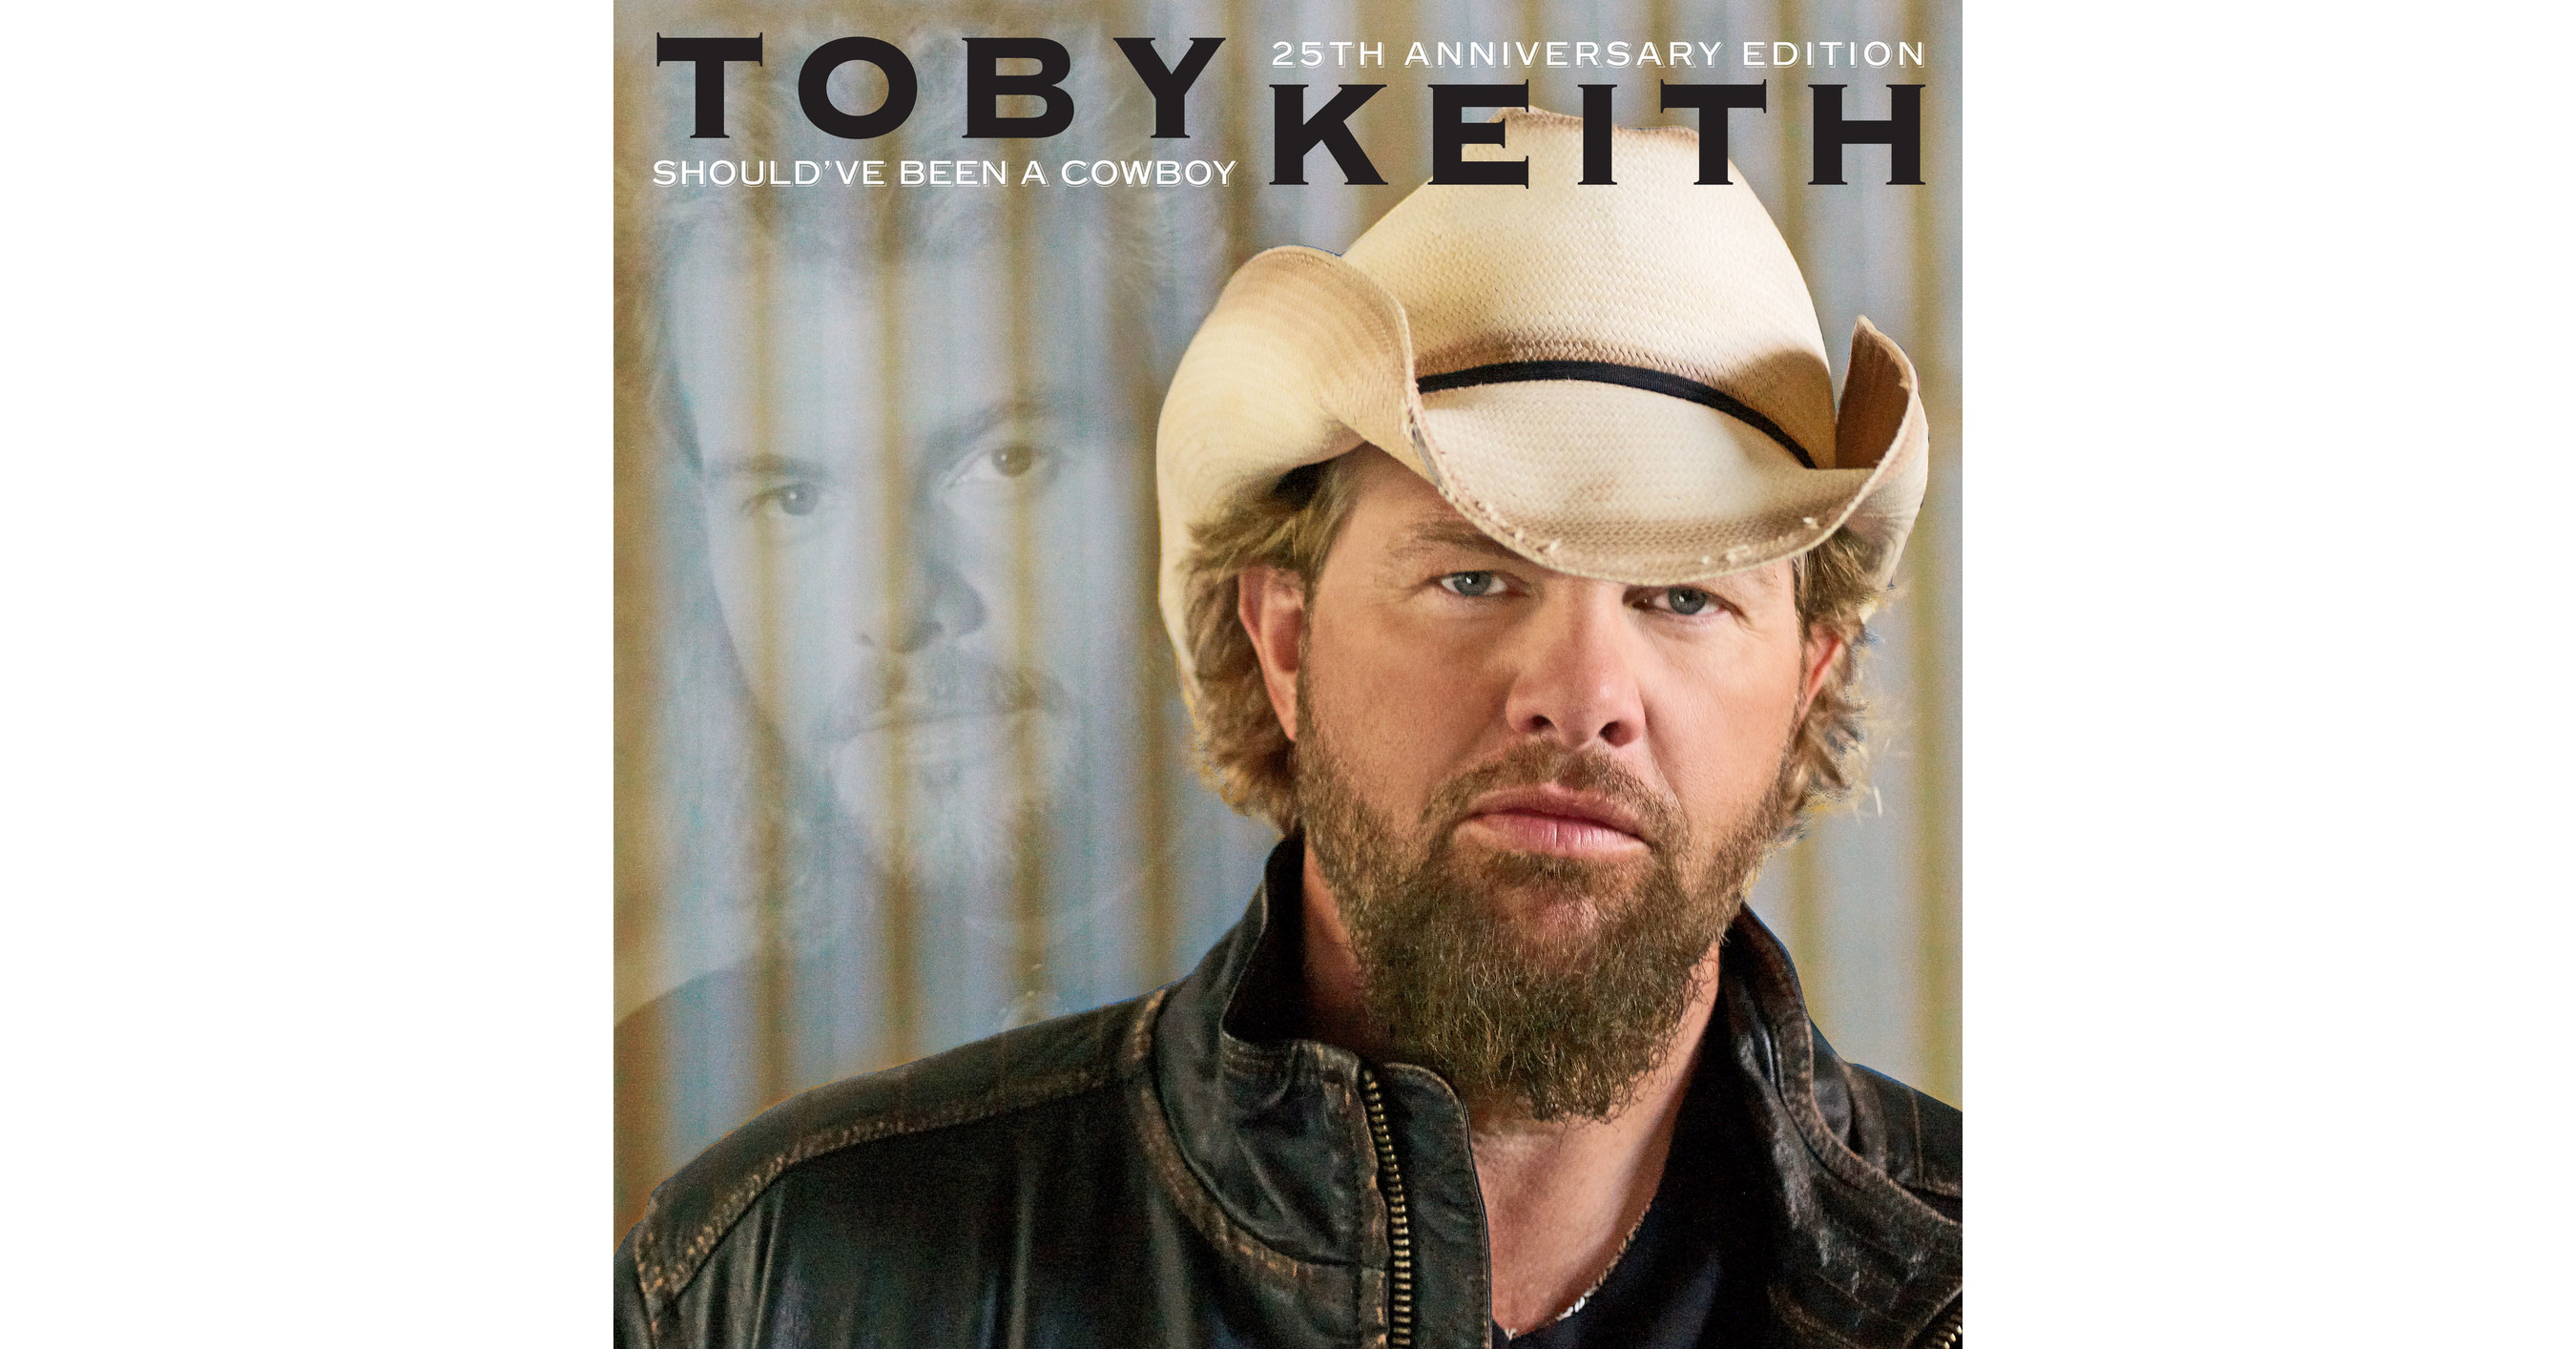 Toby Keith S Debut Album Celebrated With Special 25th Anniversary